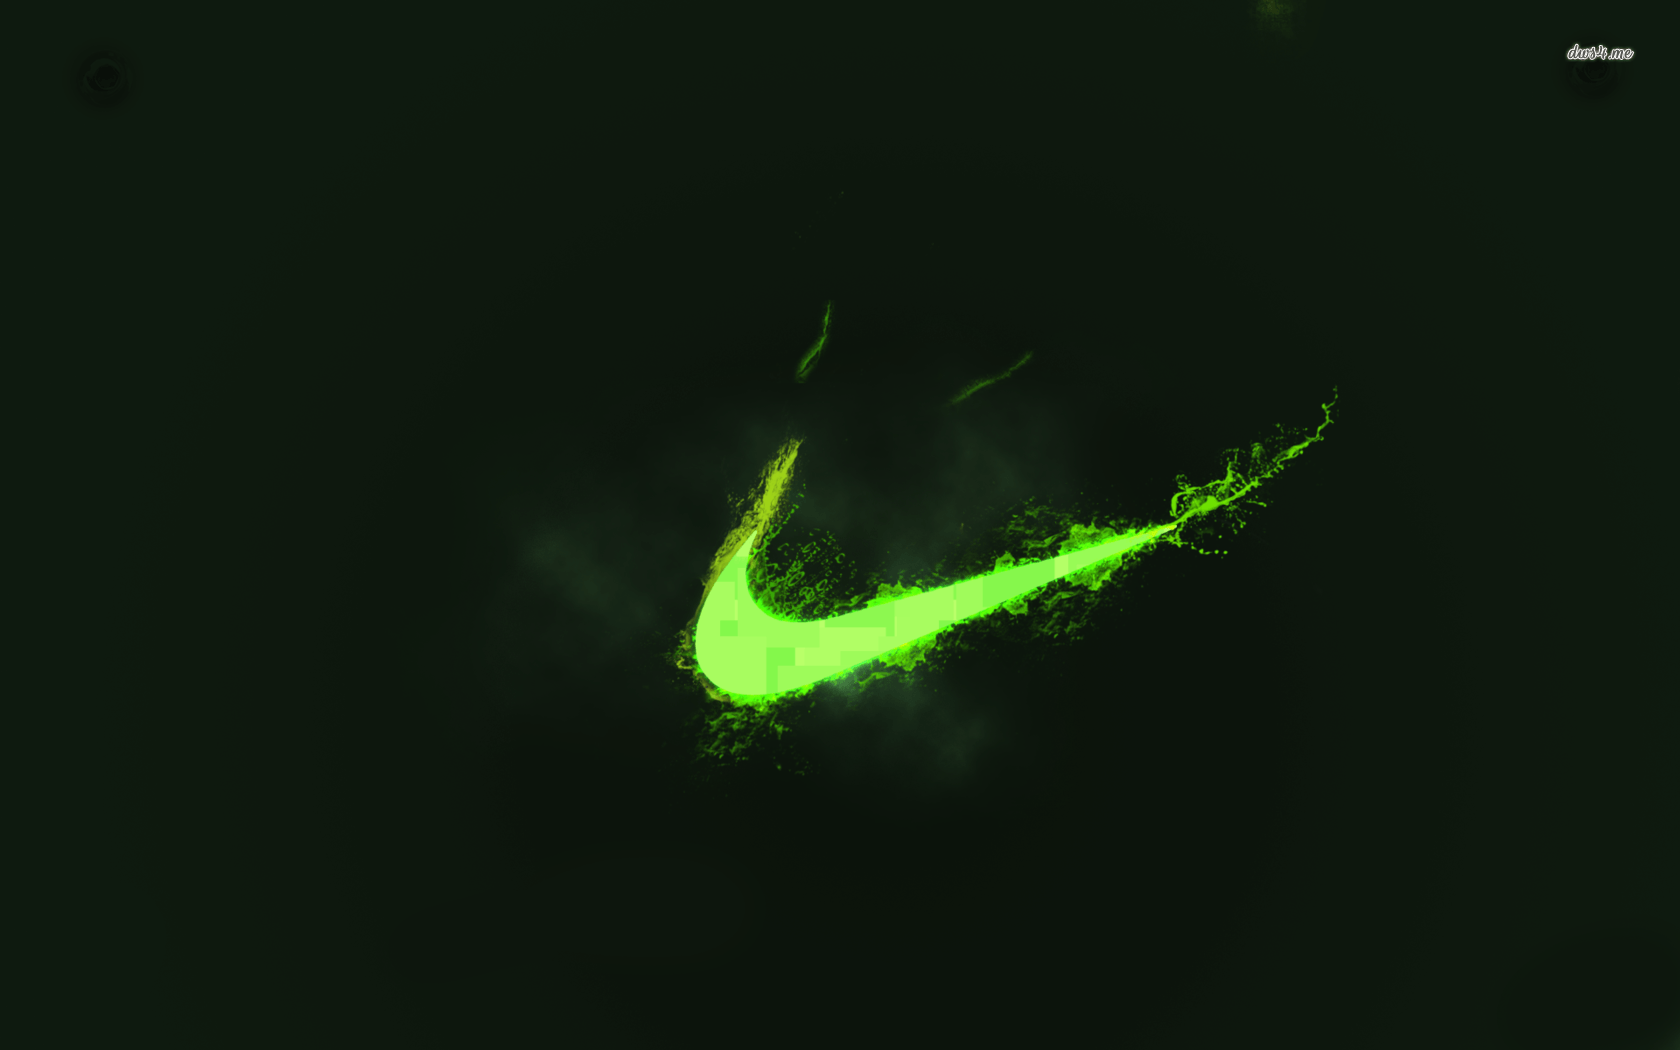 Awesome Neon Green Wallpaper in High Quality, Jonny Gloster